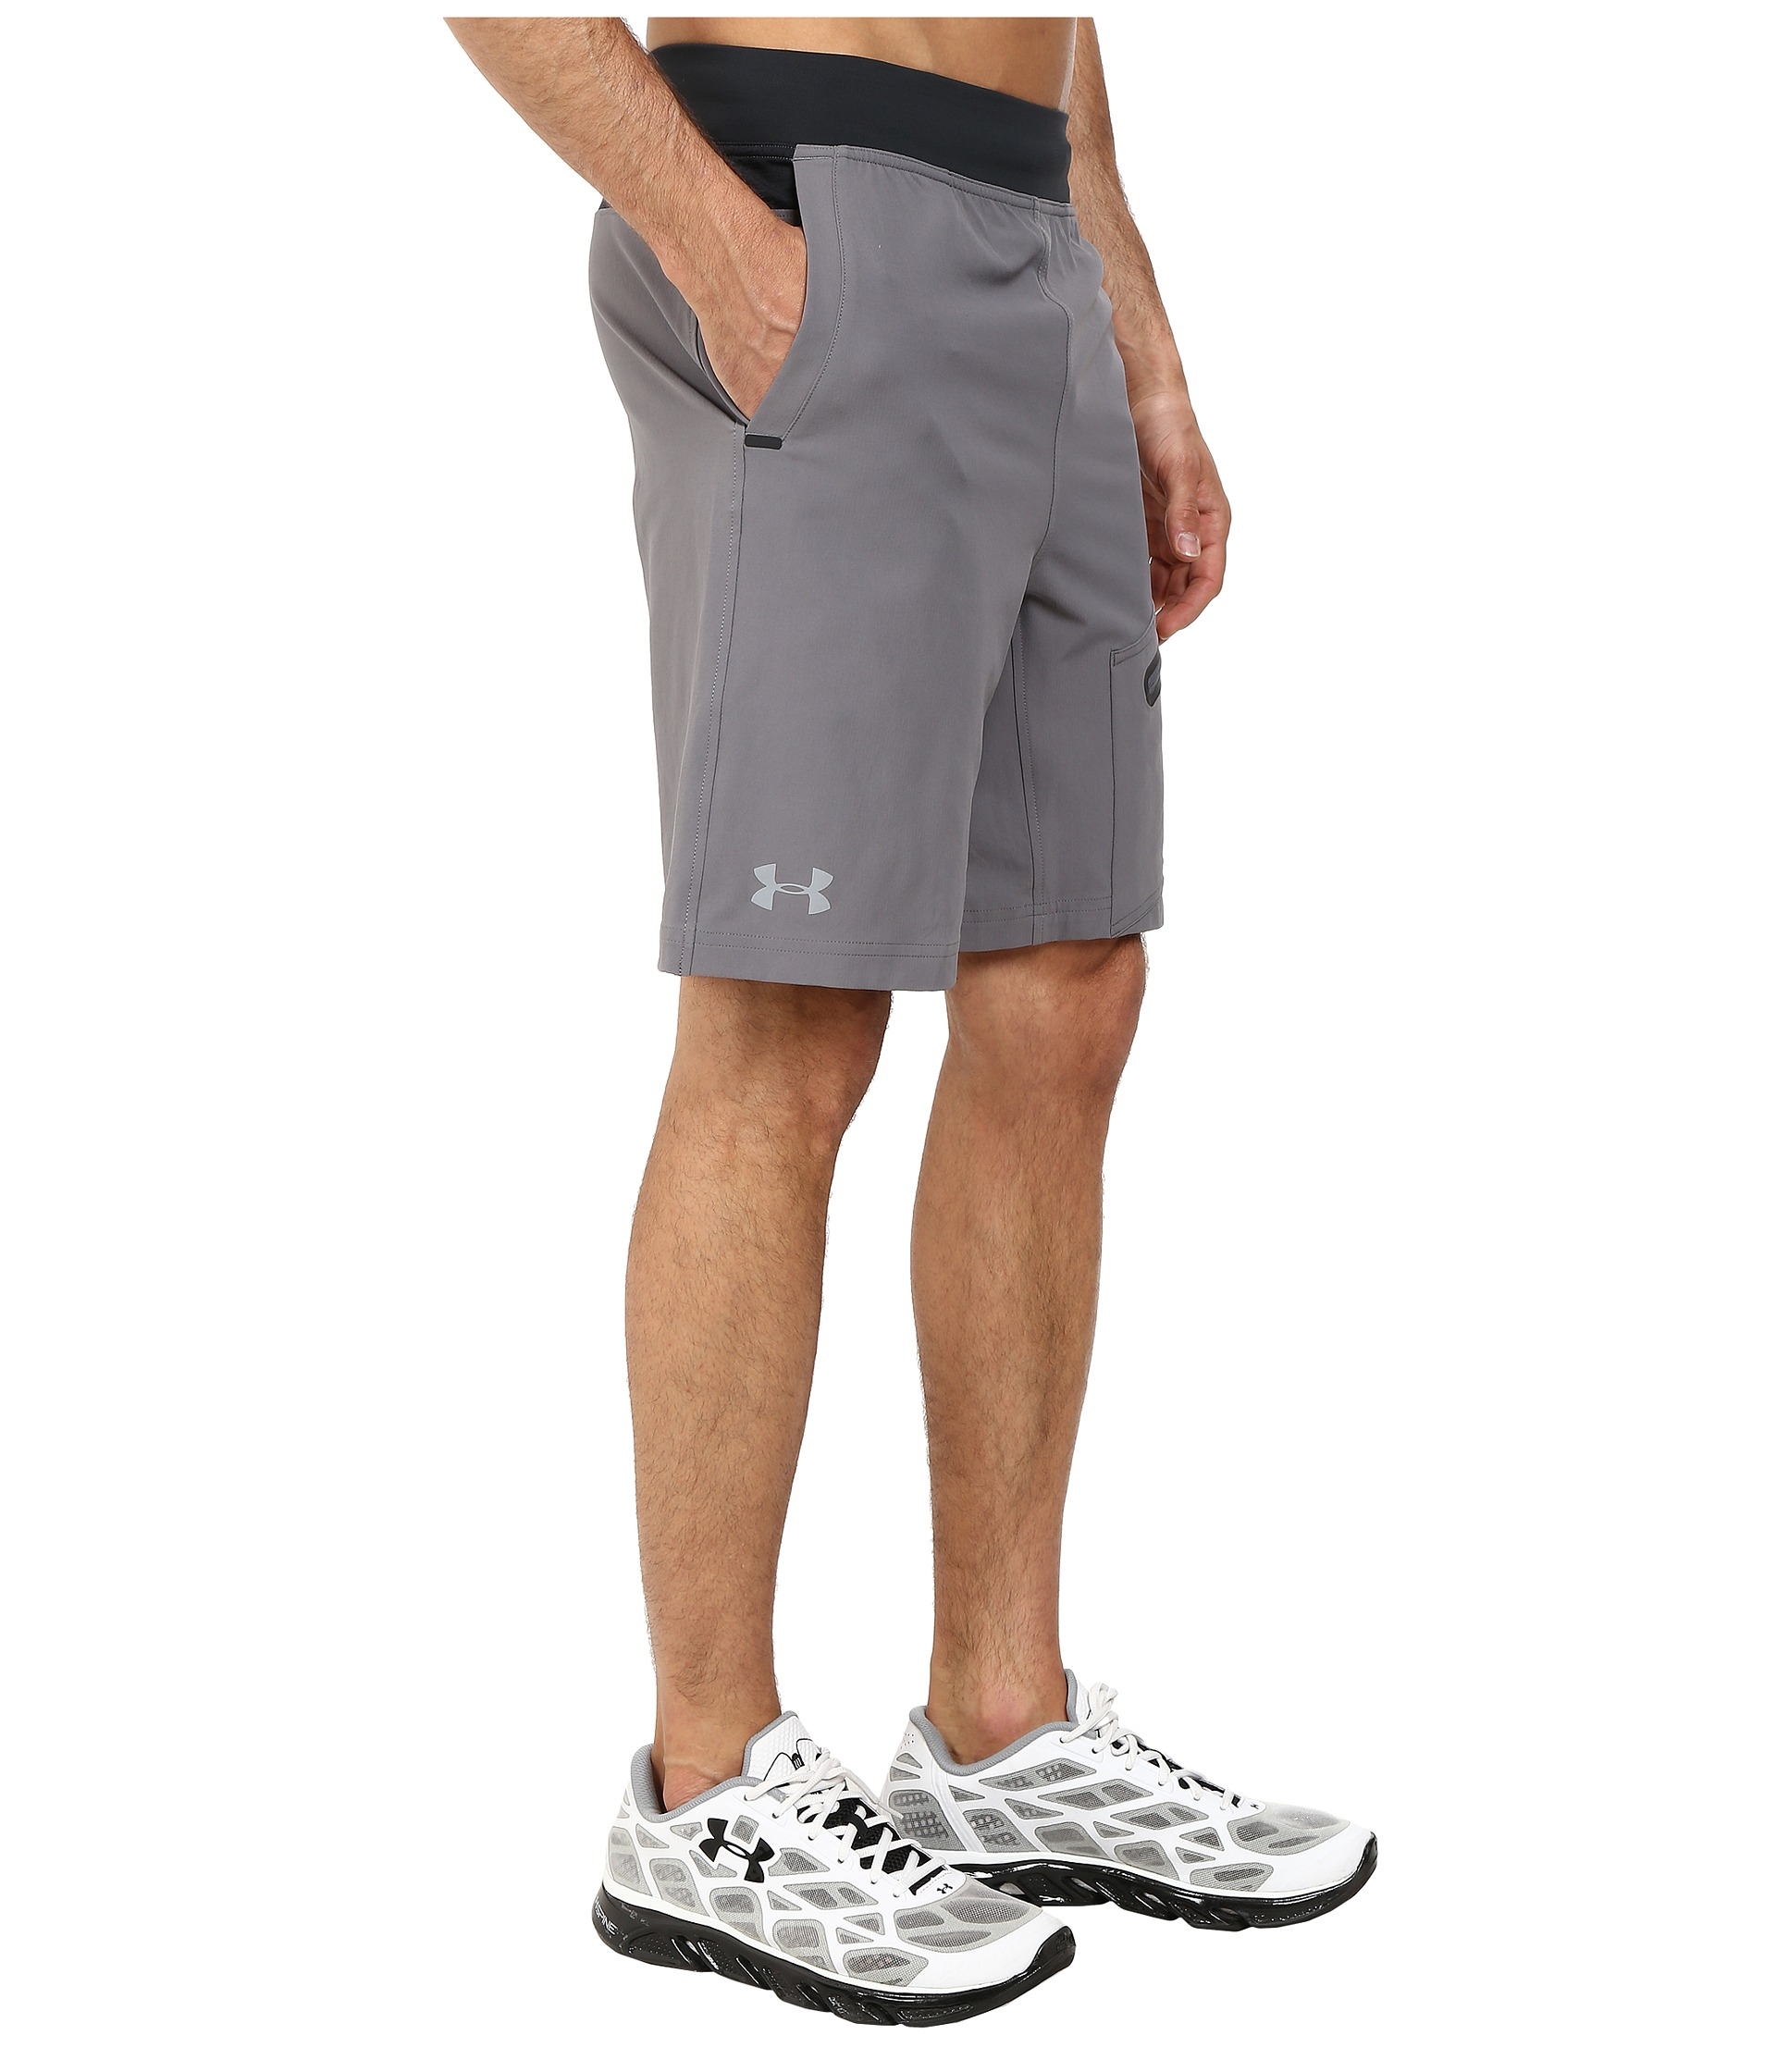 Under Armour Ua Elevated Woven Short in Graphite/Anthracite/Steel (Gray)  for Men - Lyst